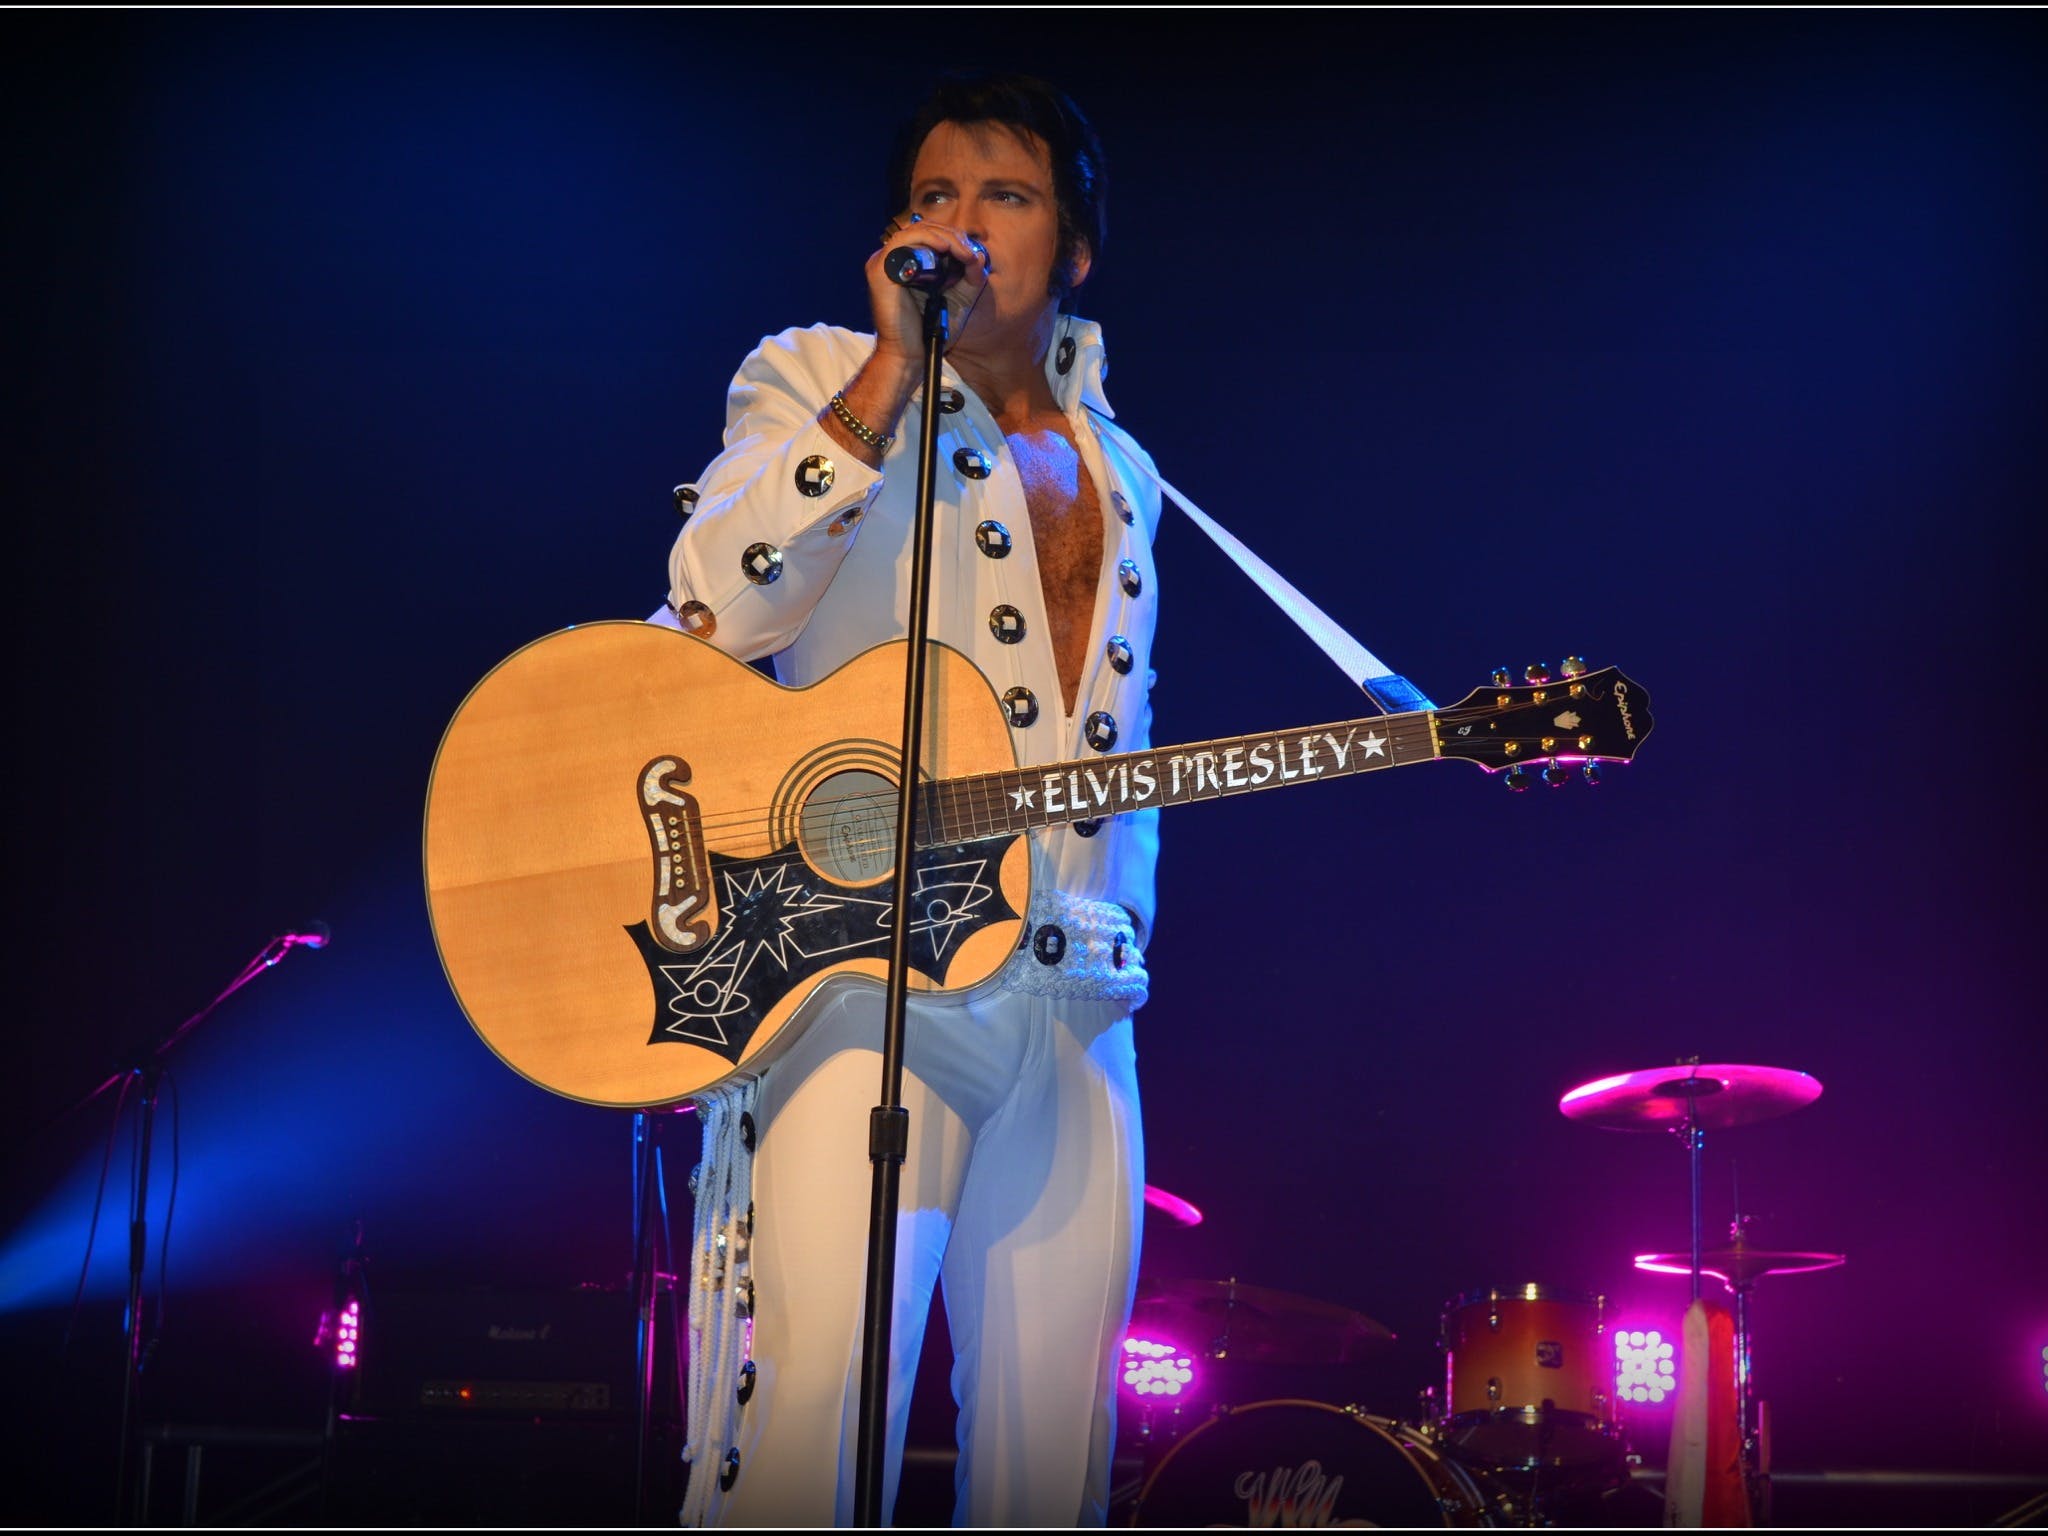 Elvis Forever - Damian Mullin 'Up Close and Personal' - Melbourne Tourism